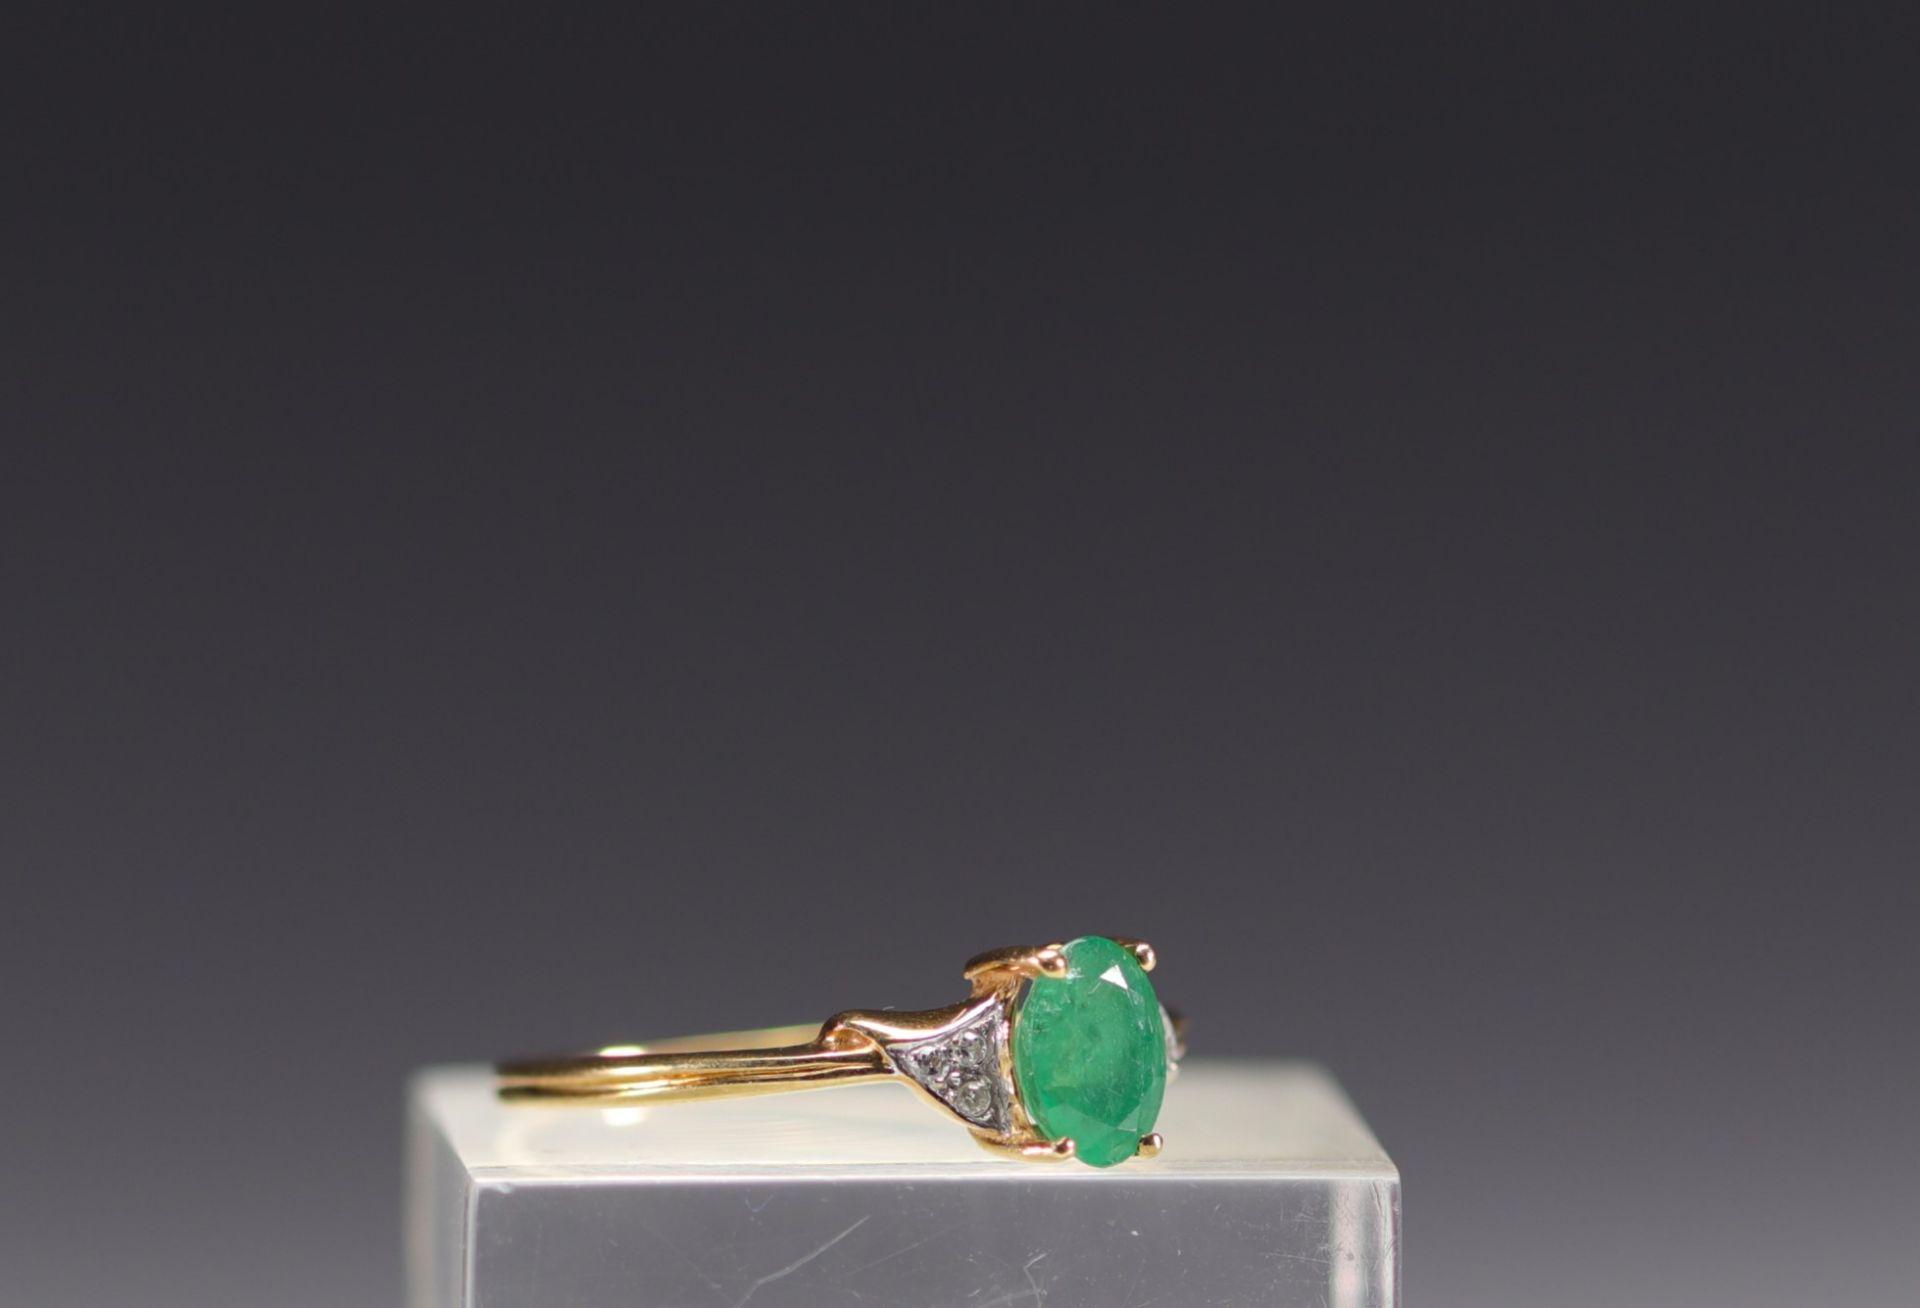 Ring in 18k gold, oval-cut emerald and diamond, total weight 2.2gr - Image 2 of 2